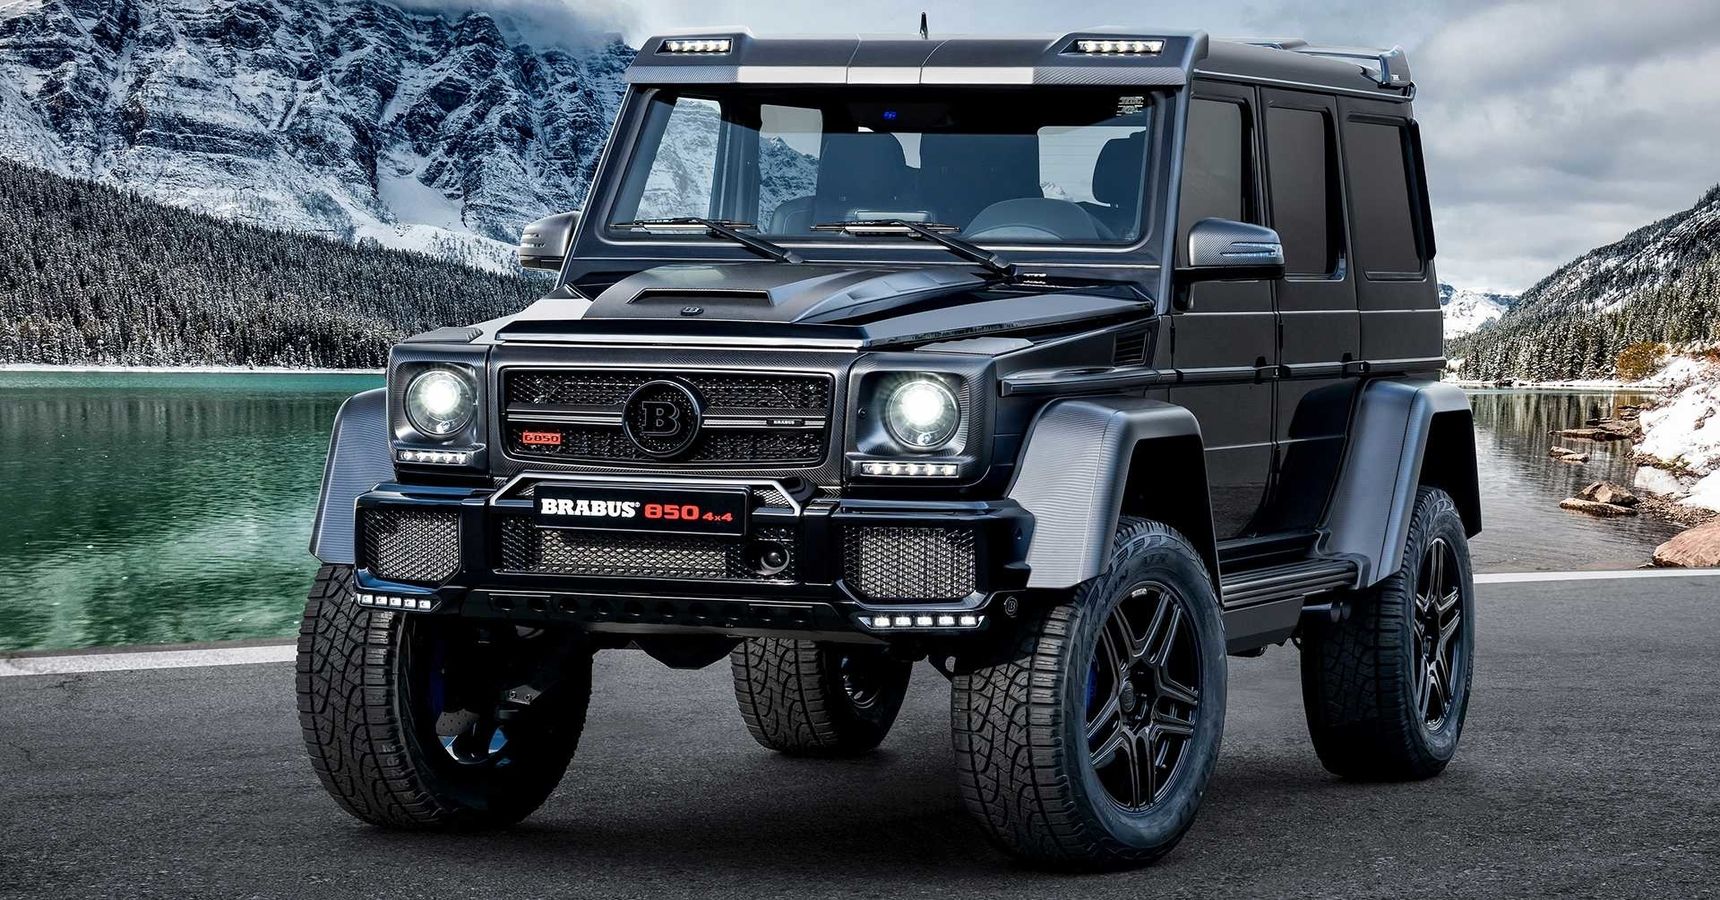 10 SUVs That Were Built To Go Off-Road... But You'll Never See Them Off The Beaten Path